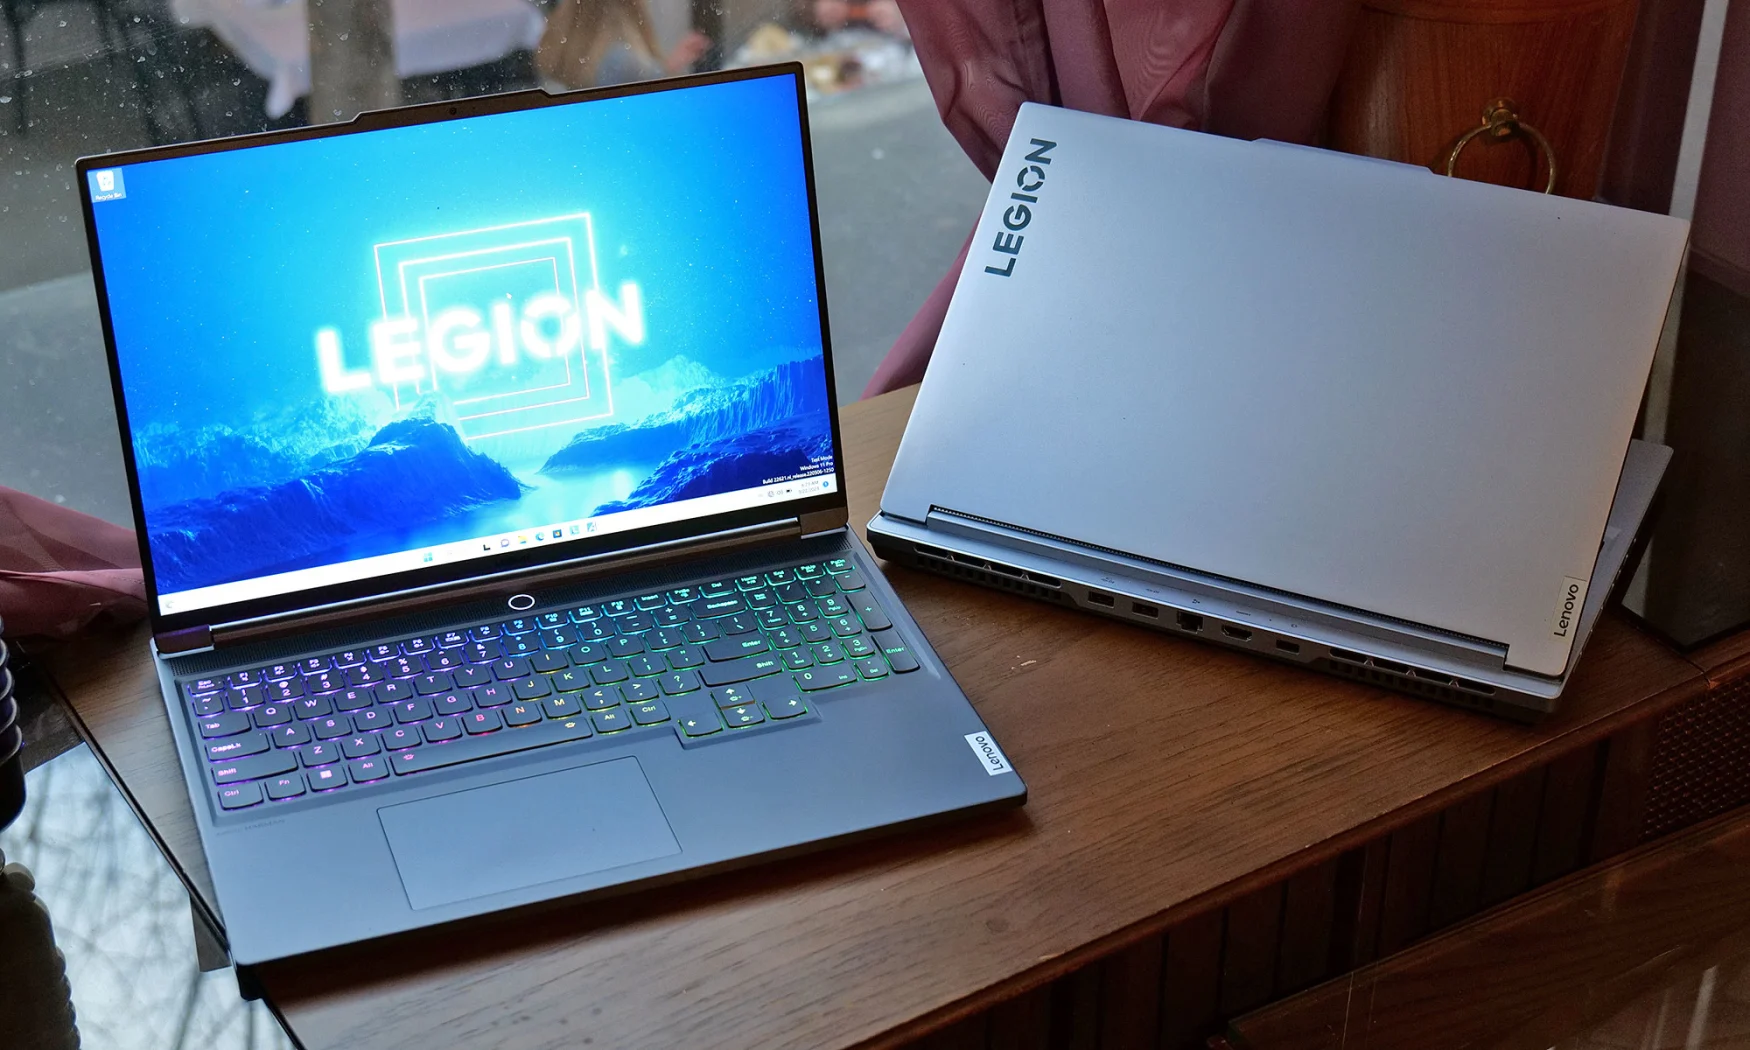 Although similar in design to the more affordable LOQ series, the Legion Slim 5 and Slim offer slightly more powerful specs in a more premium aluminum chassis. 